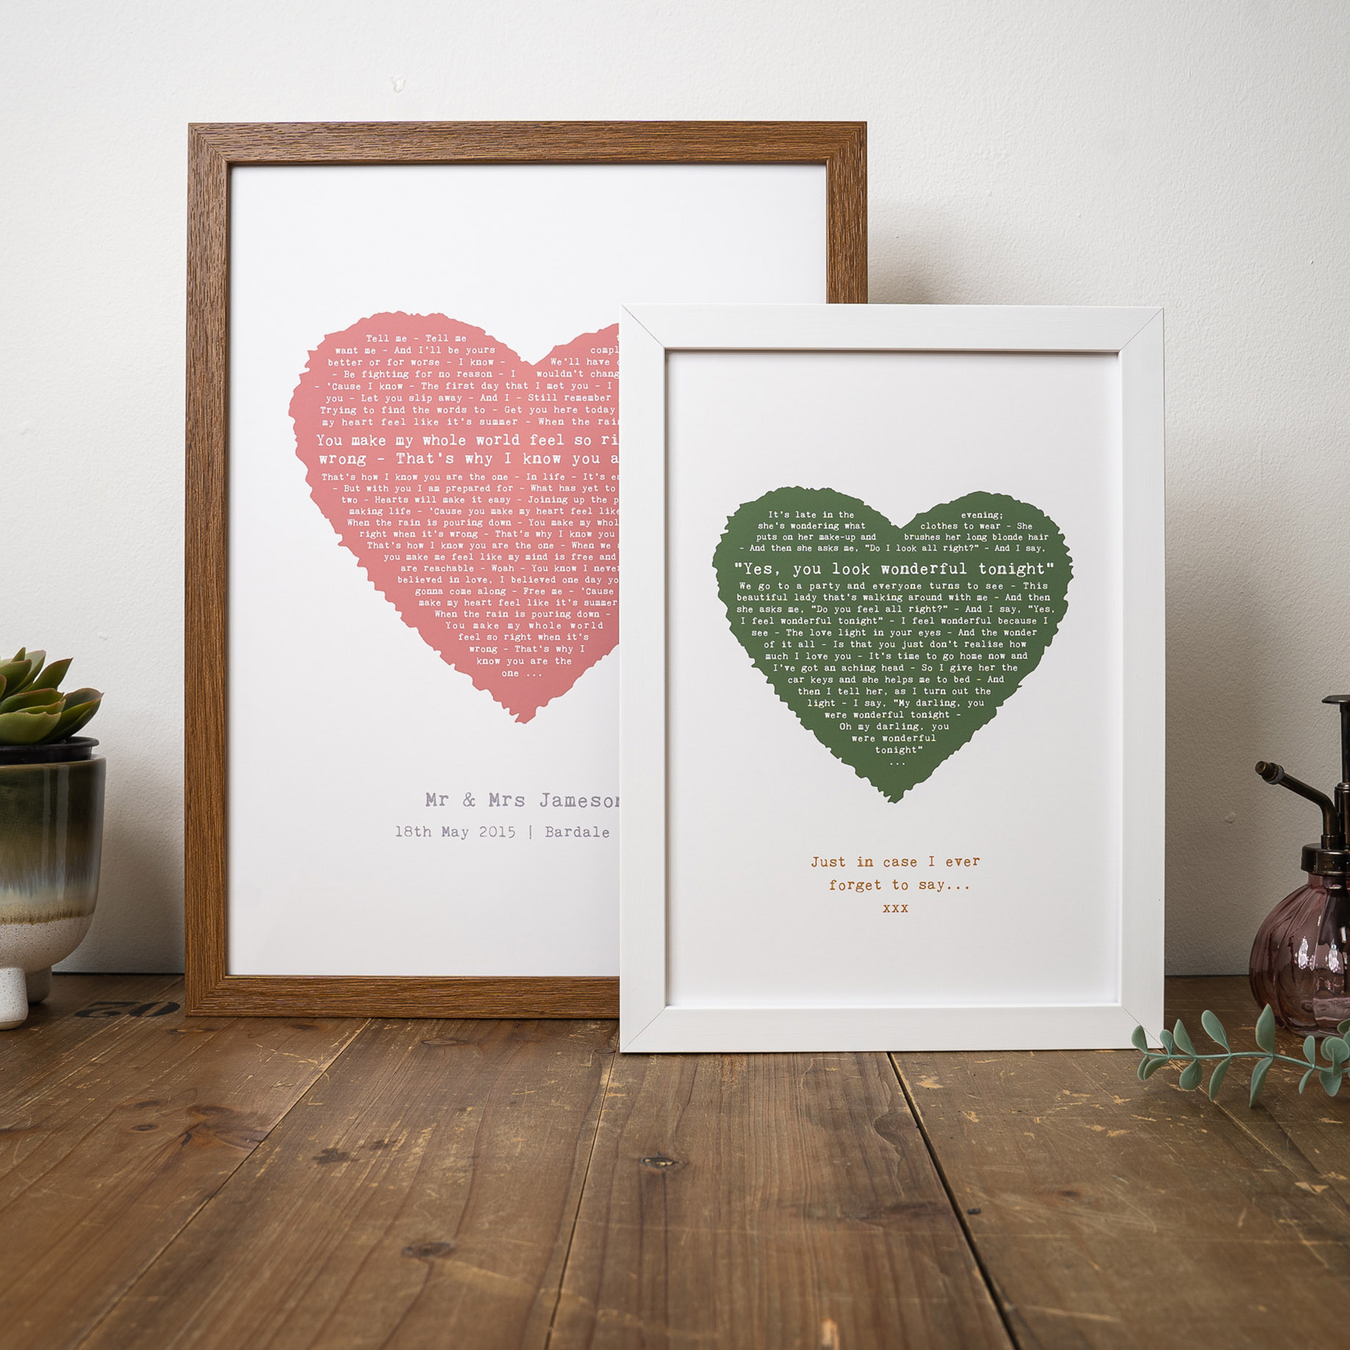 "All of me - John Legend" song lyrics heart print representing our gifts for her collection